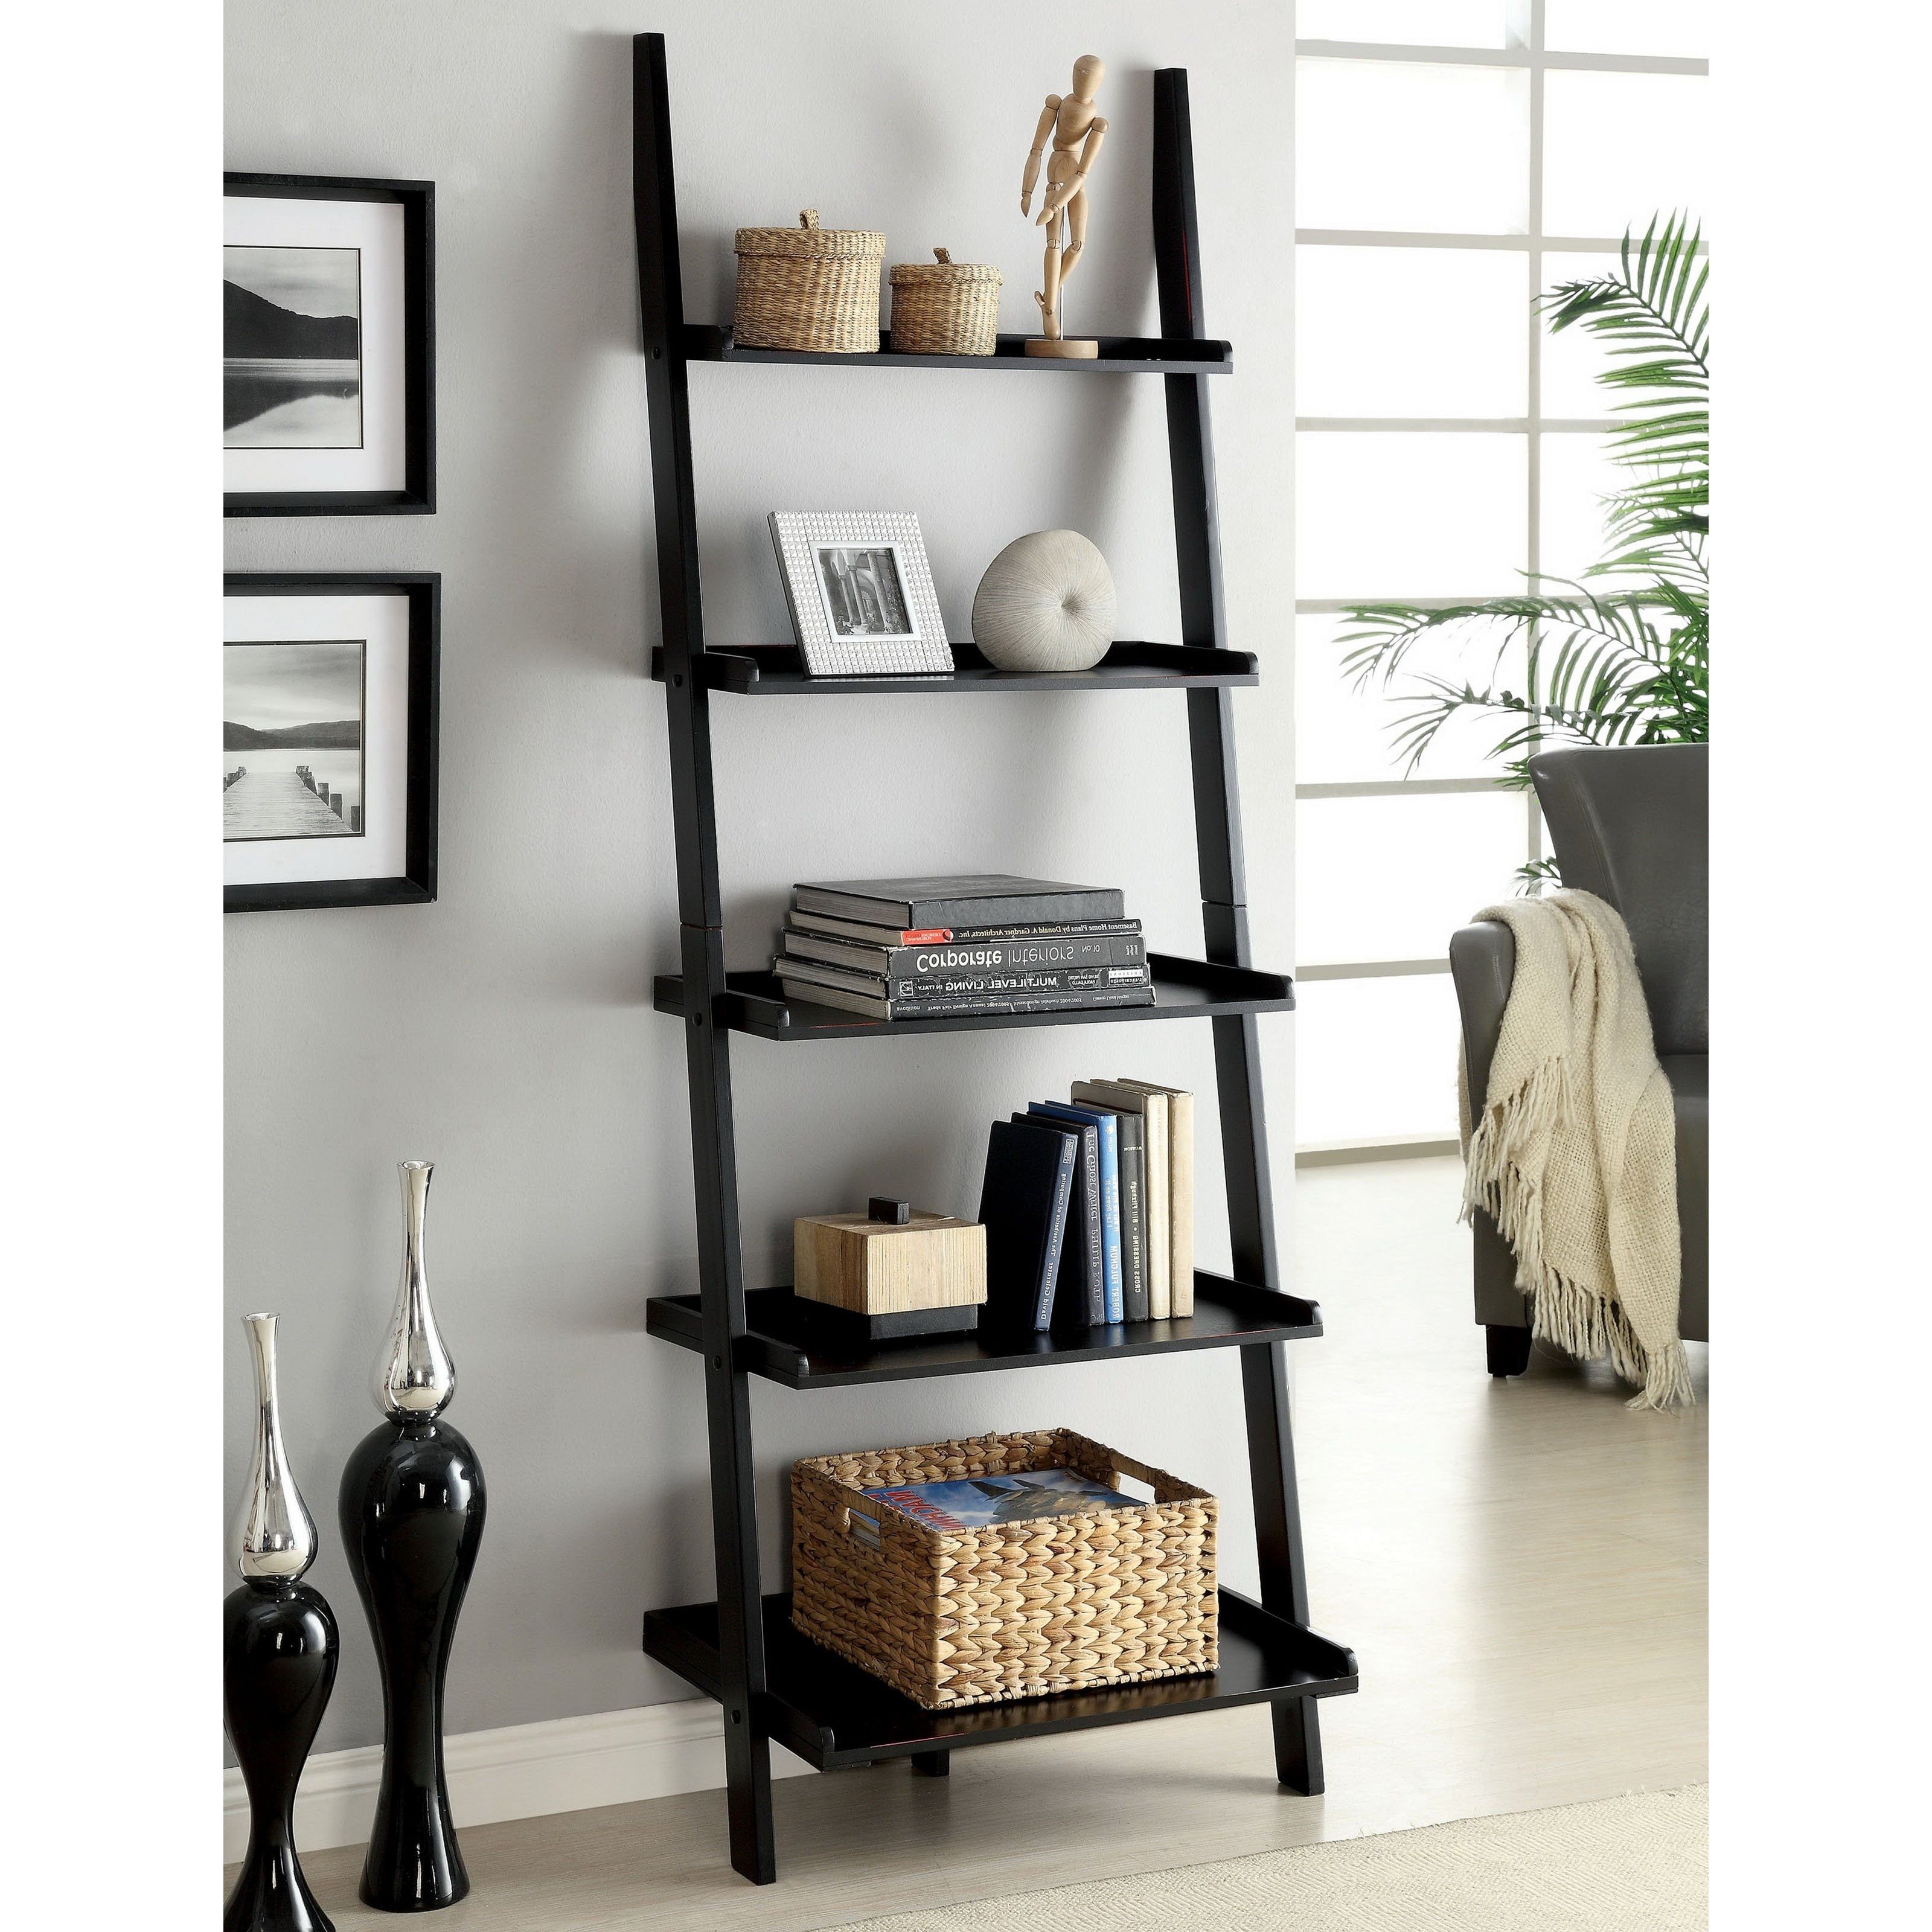 Most Recently Released Threshold Carson 5 Shelf Bookcases Inside Etagere Bookcase Fresh Decoration Threshold Carson 5 Shelf (View 14 of 15)